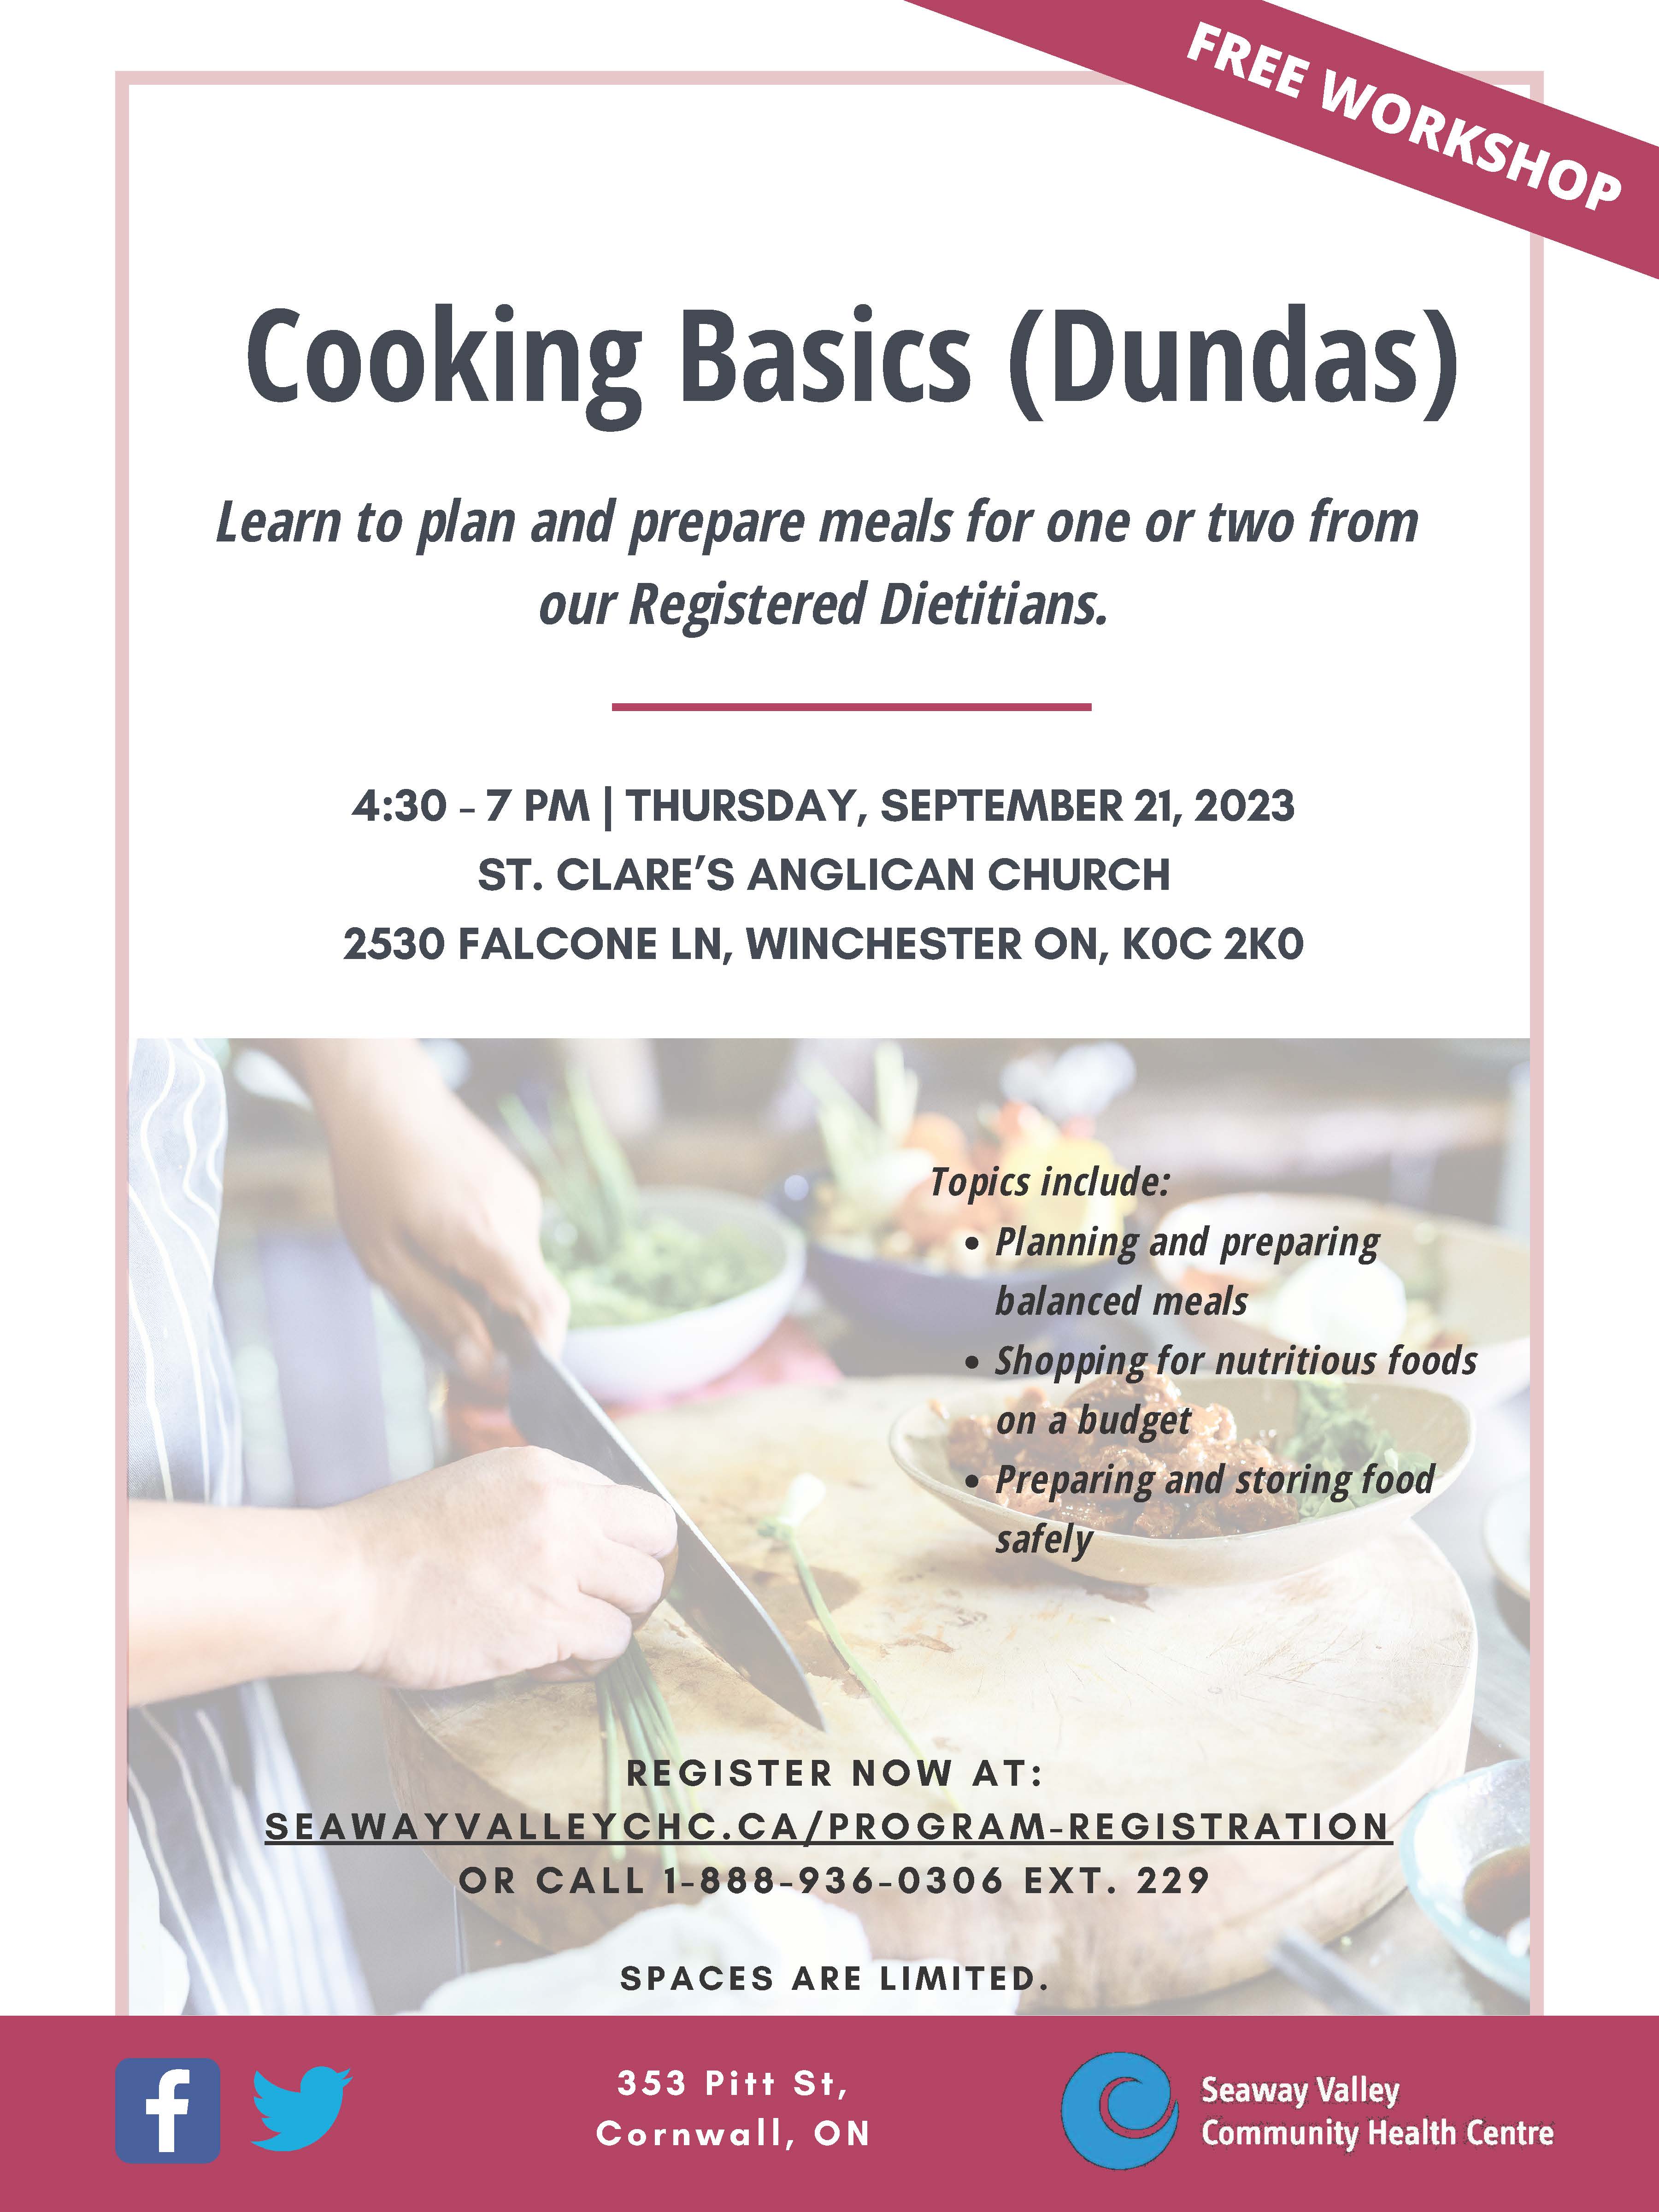 Cooking Basic event poster